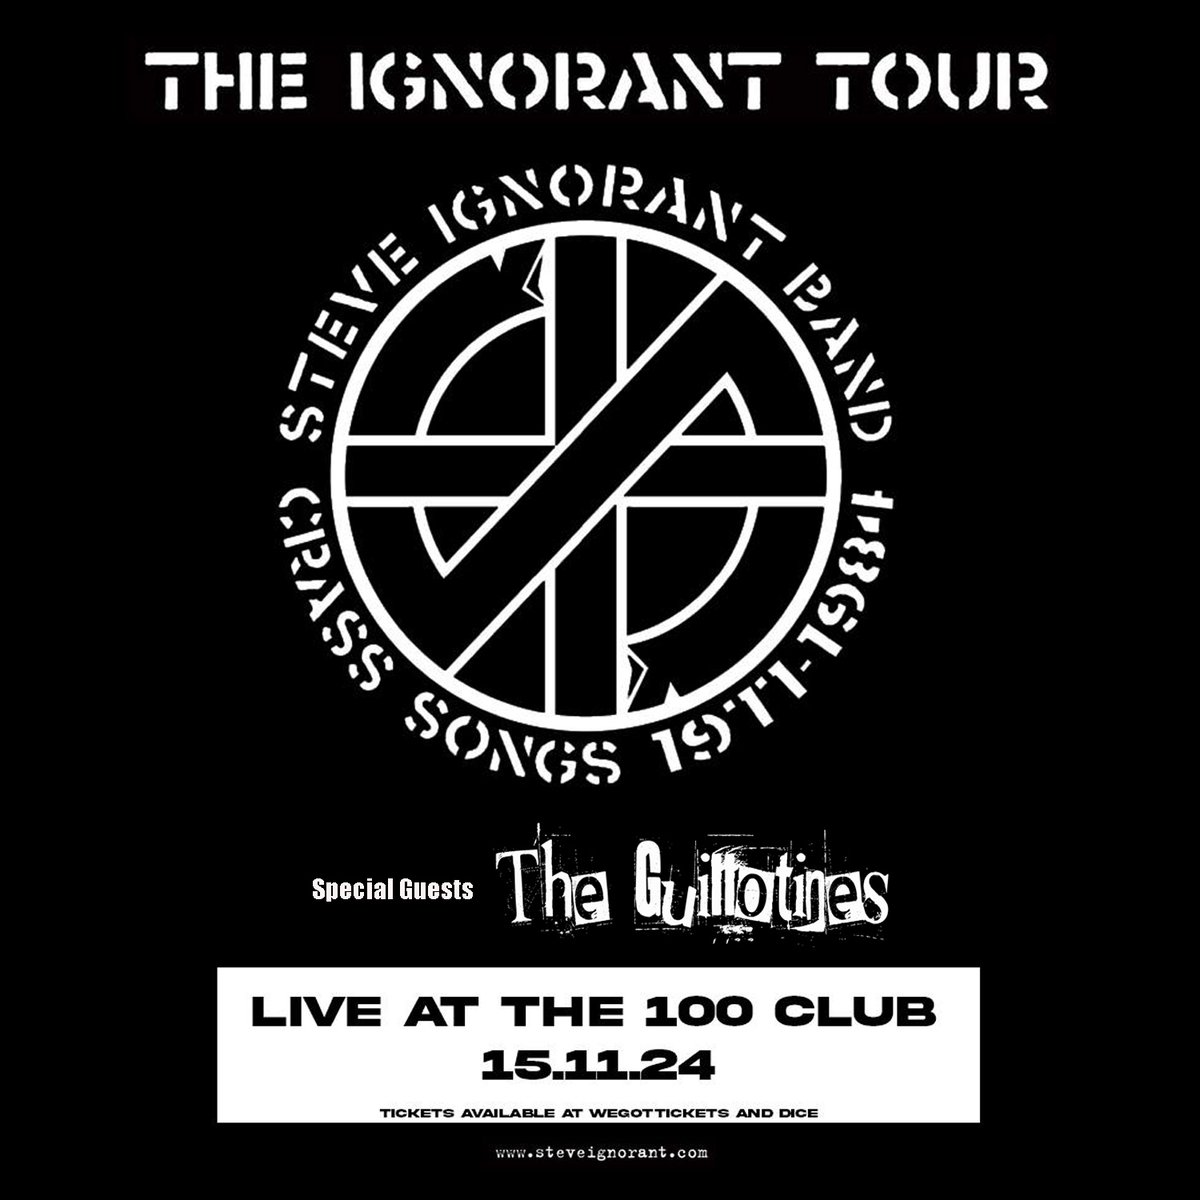 We are super excited to have The Guillotines joining us at The 100 Club in November. Tickets are going fast. 15-11-2024 100 Club, London wegottickets.com/event/609755 #steveignorantband #crass #theguillotines #steveignorant @the100clublondon